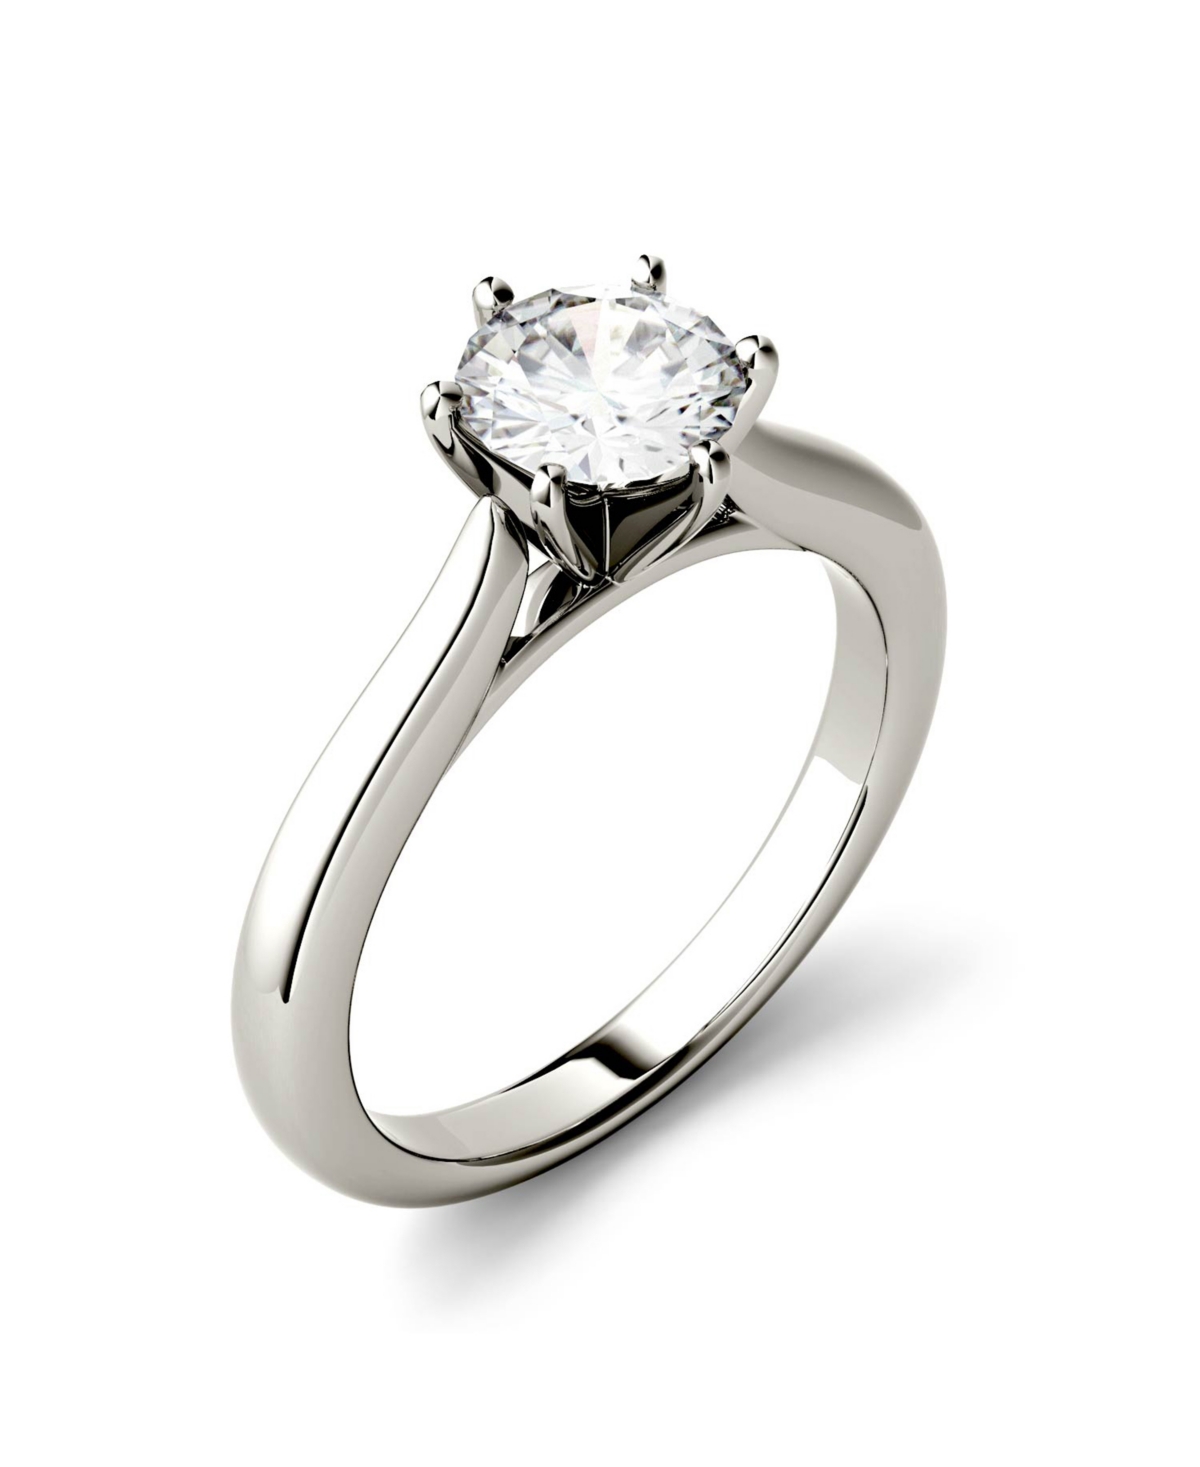 Charles & Colvard Moissanite Solitaire Engagement Ring 1/2 ct. t.w. Diamond Equivalent in 14k White Gold